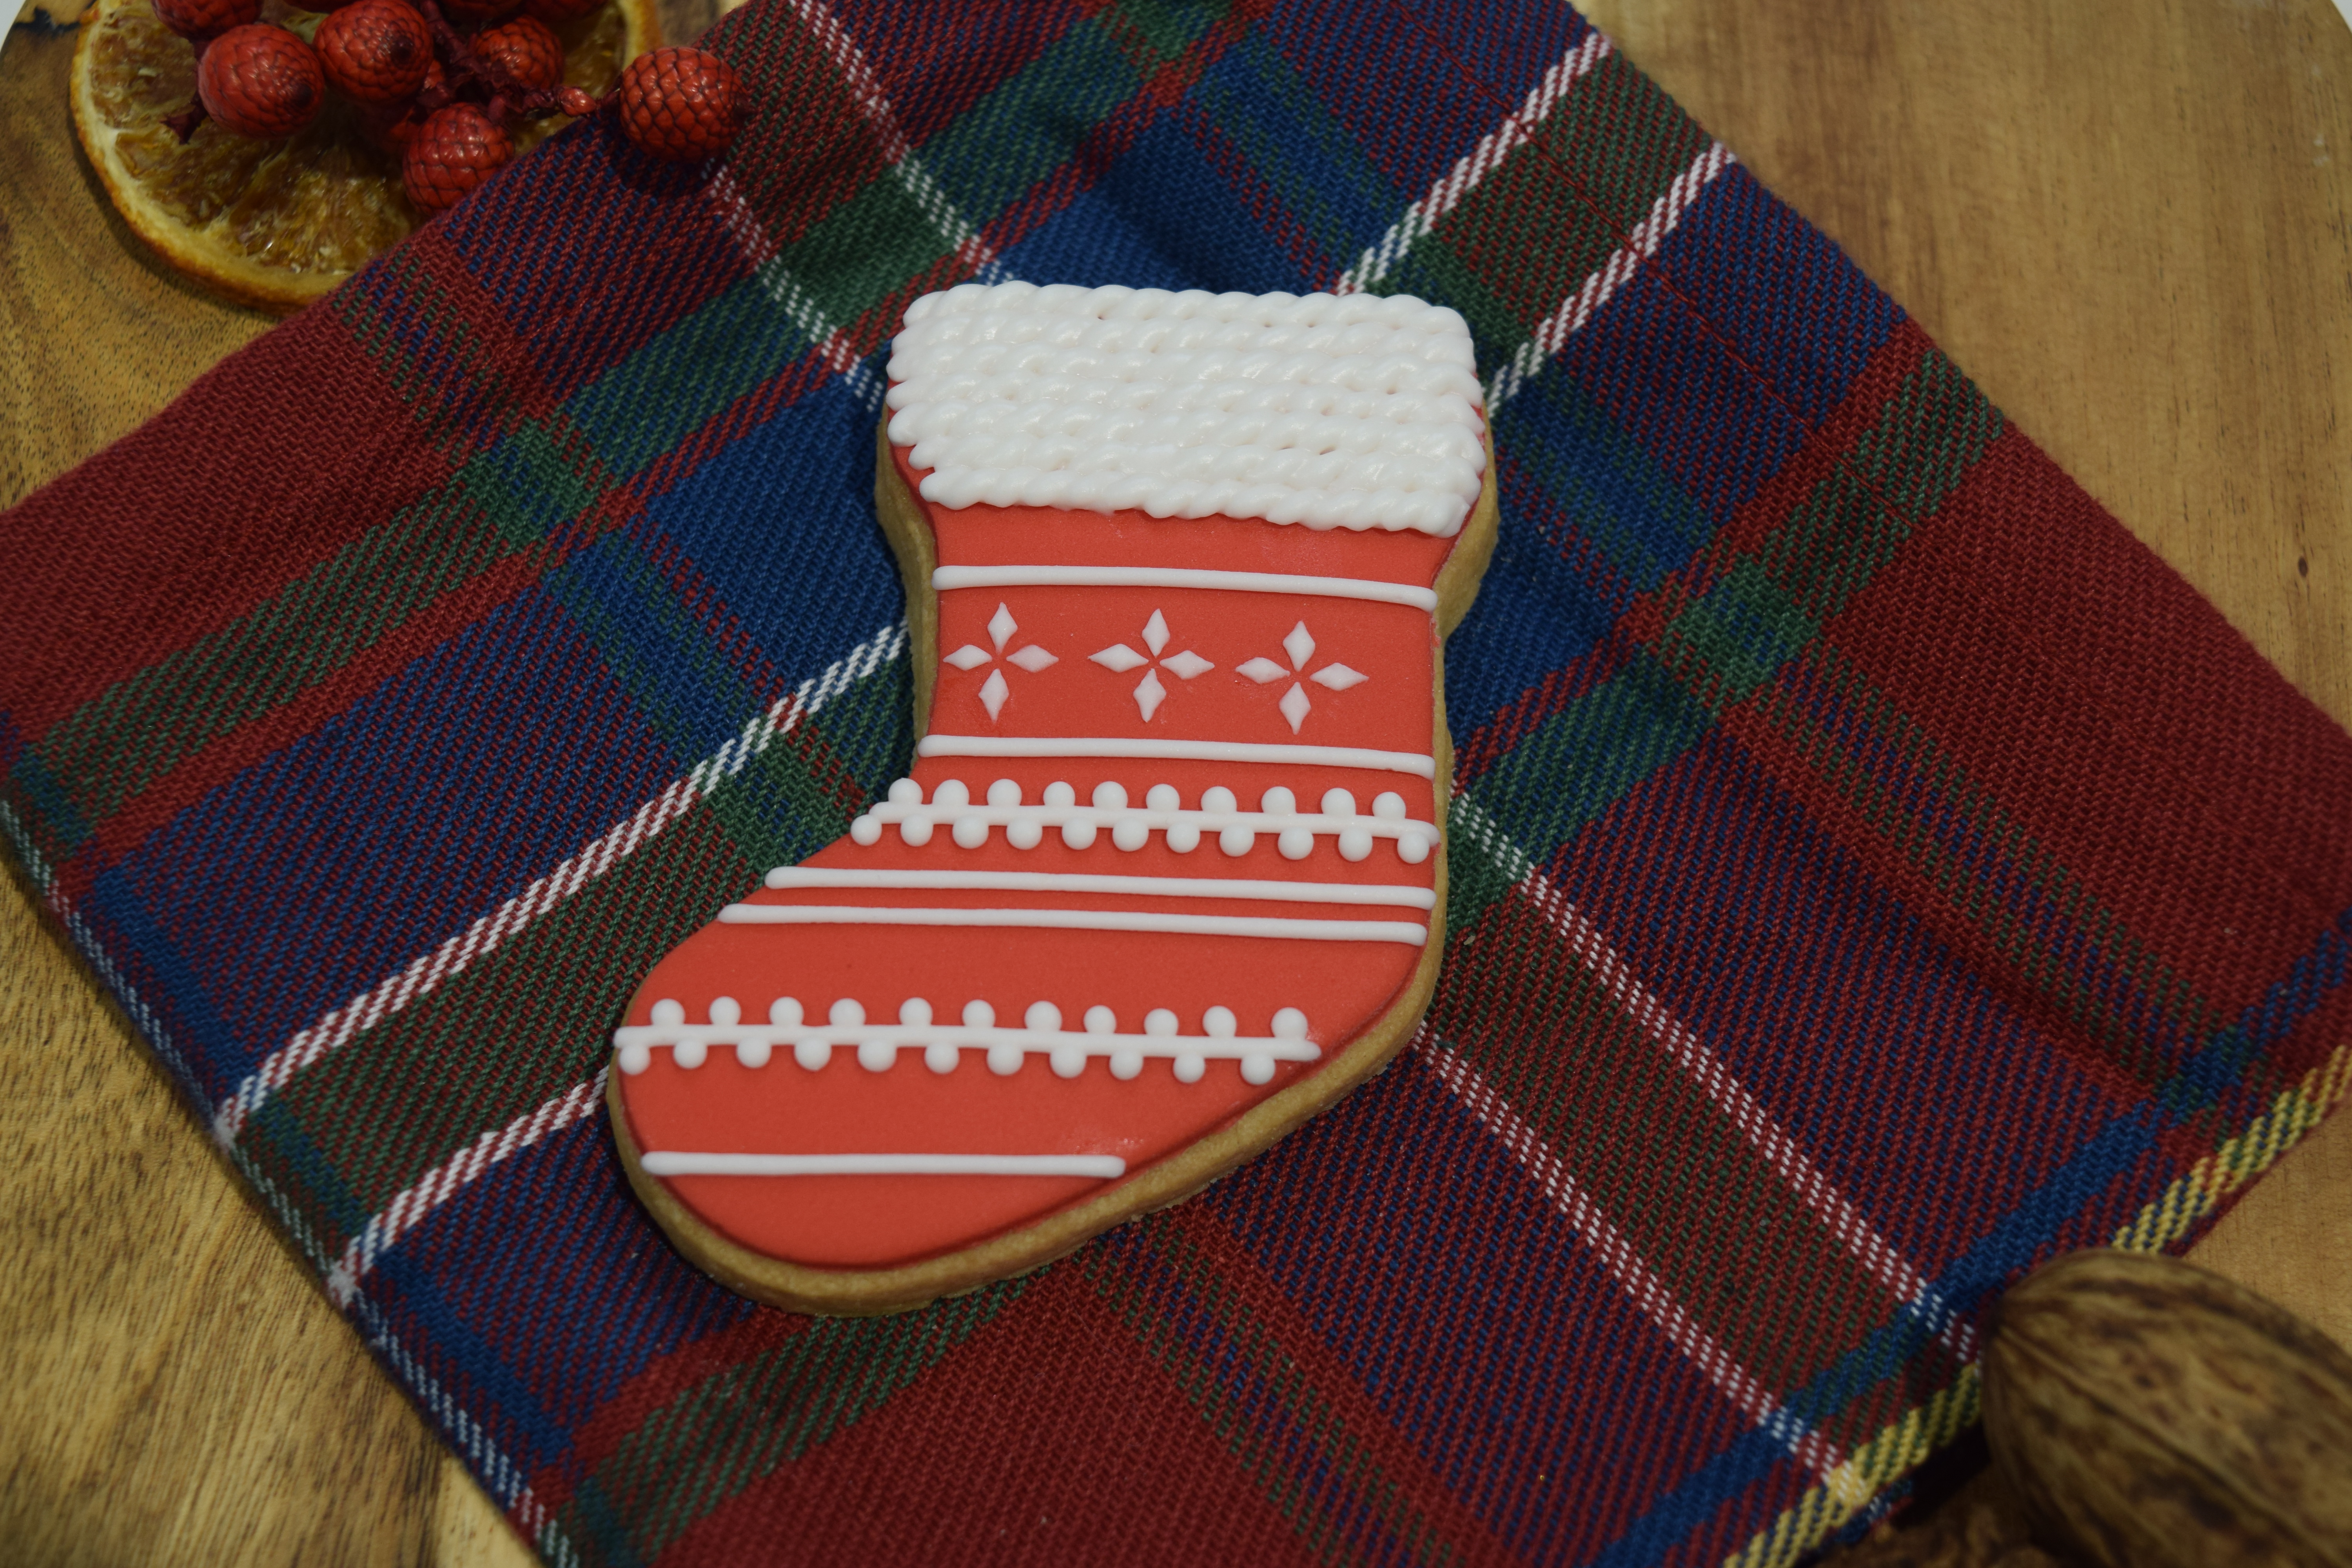 Christmas Stocking Biscuits